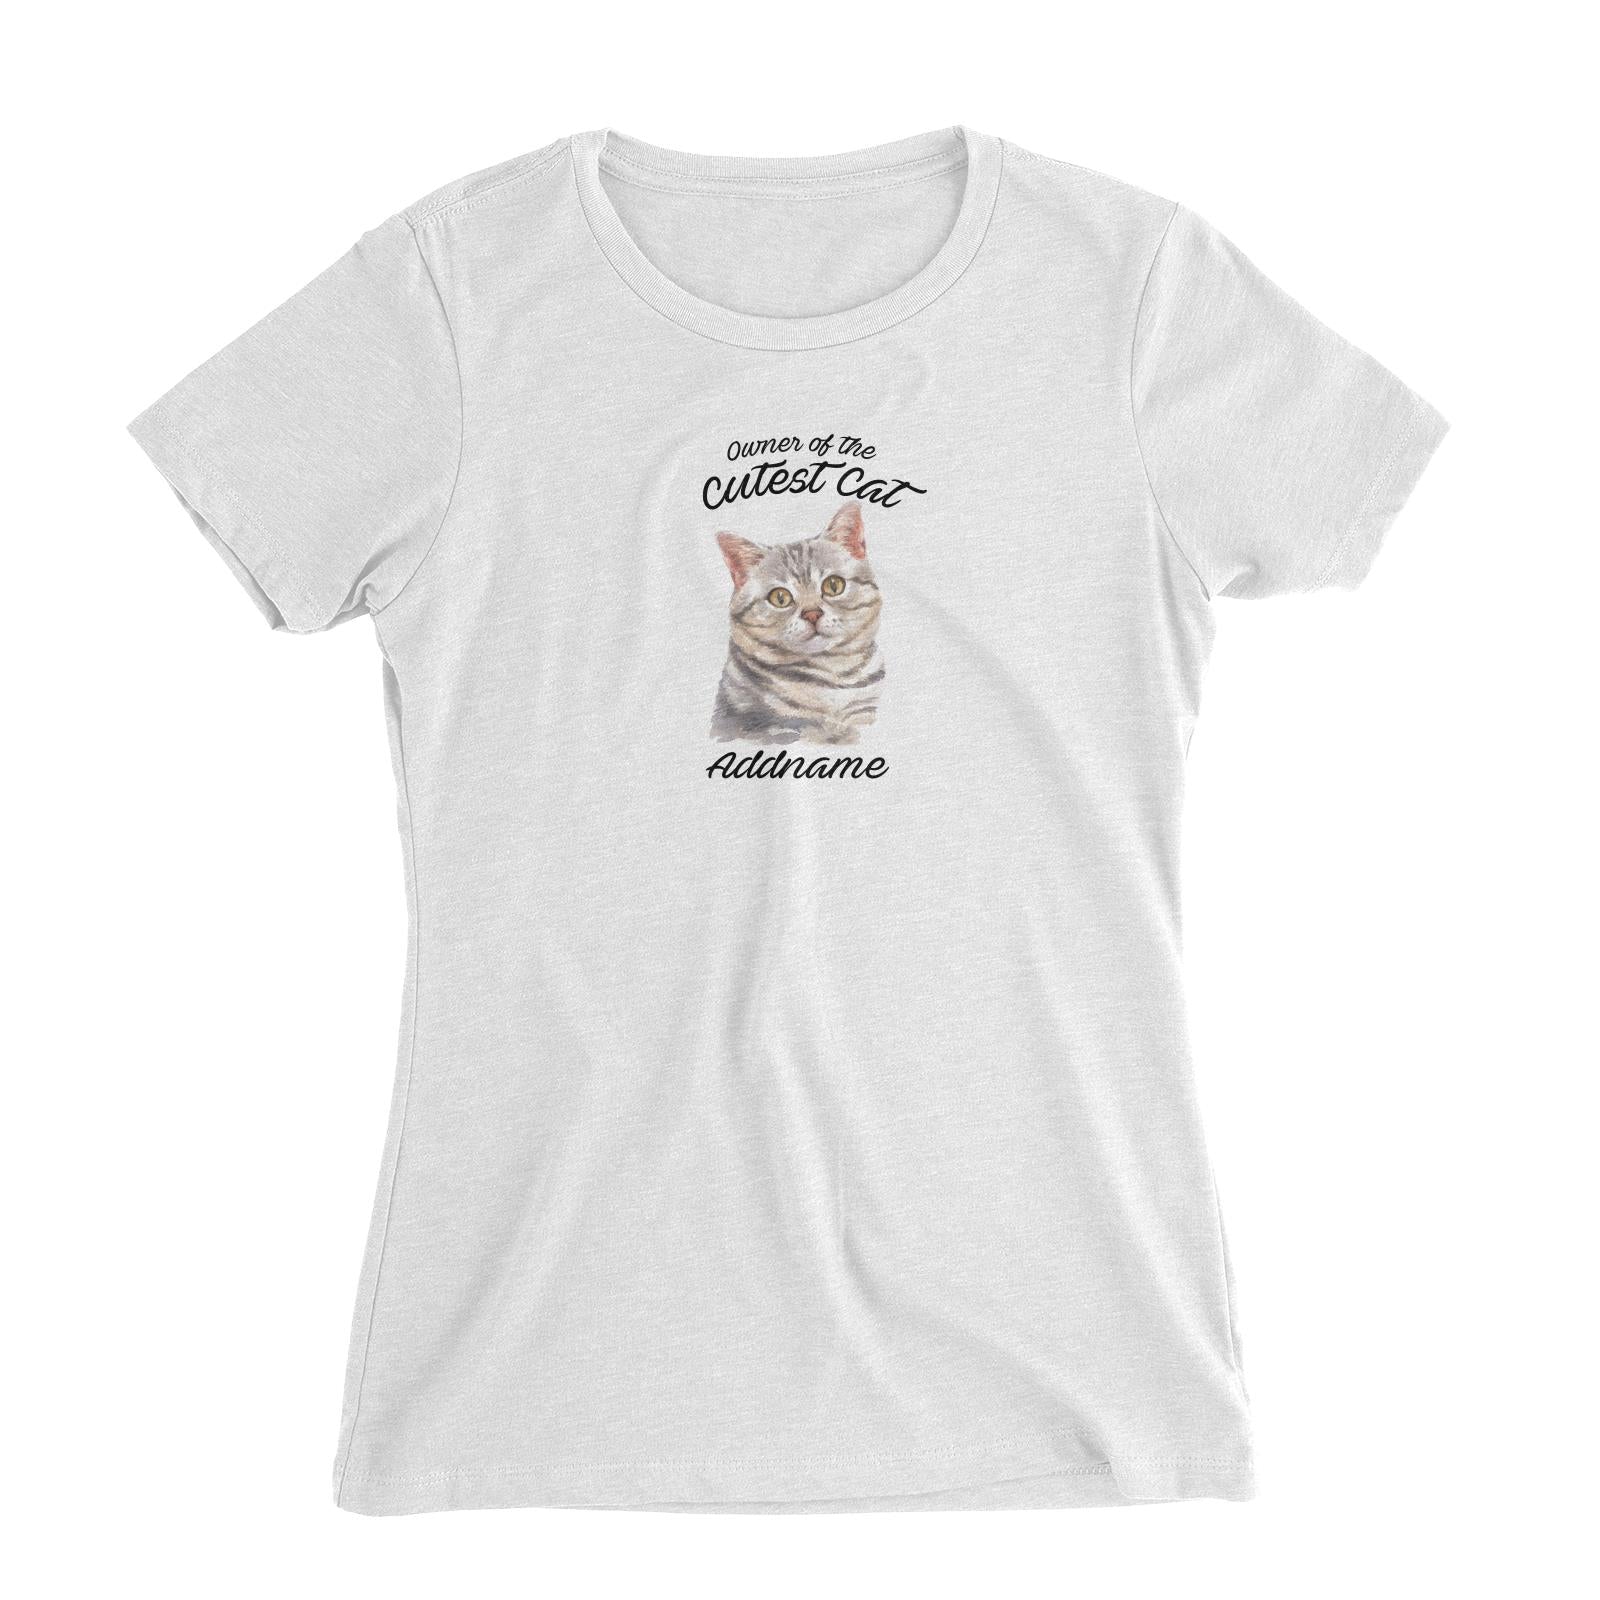 Watercolor Owner Of The Cutest Cat Grey American Shorthair Addname Women's Slim Fit T-Shirt